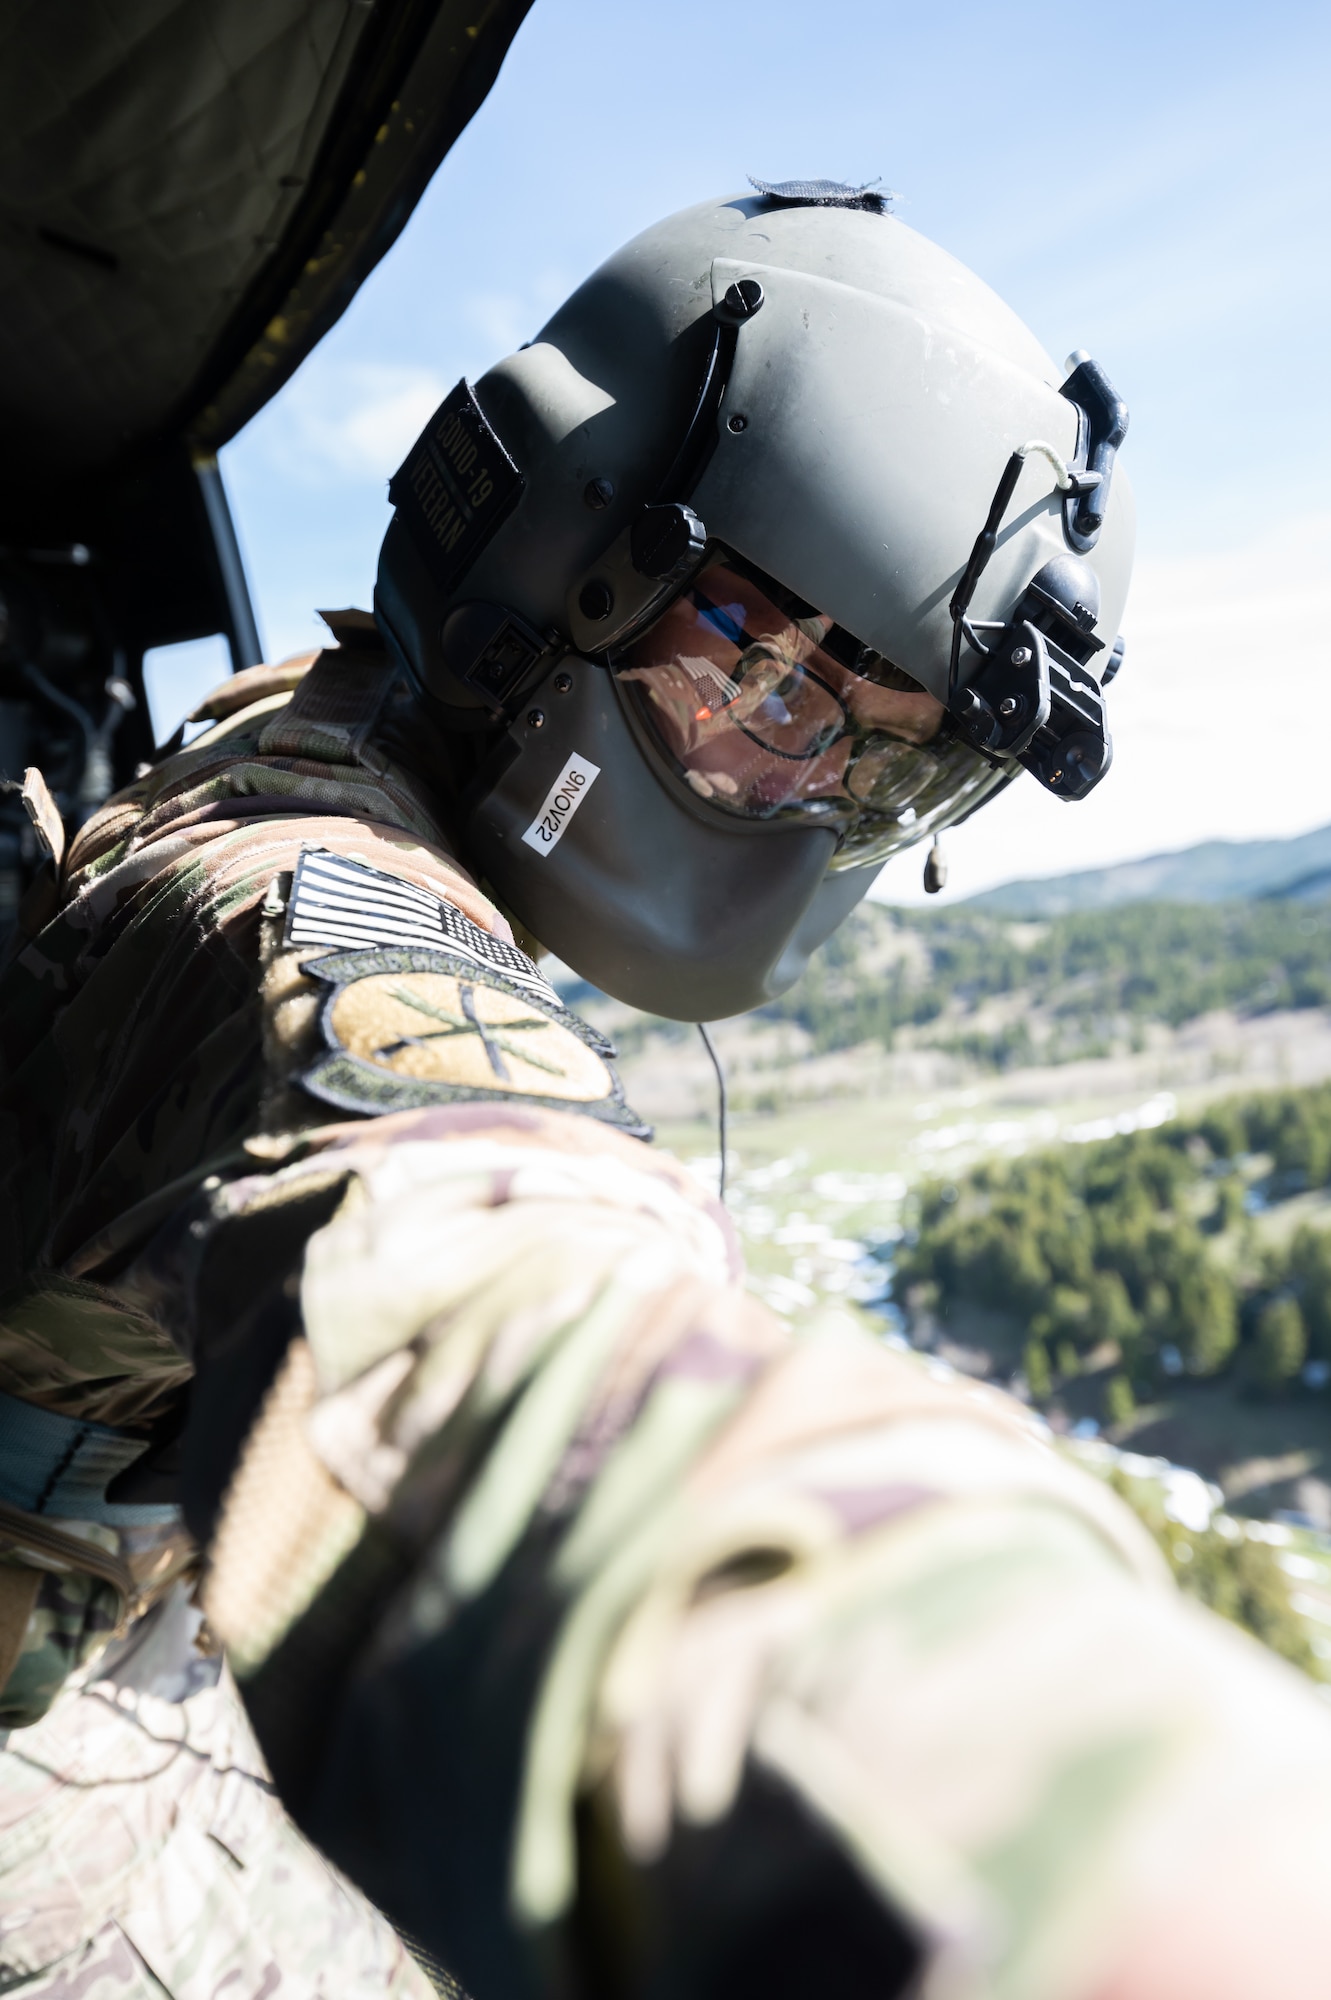 Staff Sgt. Chase Rose, 40th Helicopter Squadron flight engineer, opens the side door of a UH-1N Huey helicopter May 24, 2022, above the Highwood Mountains near Great Falls, Mont.